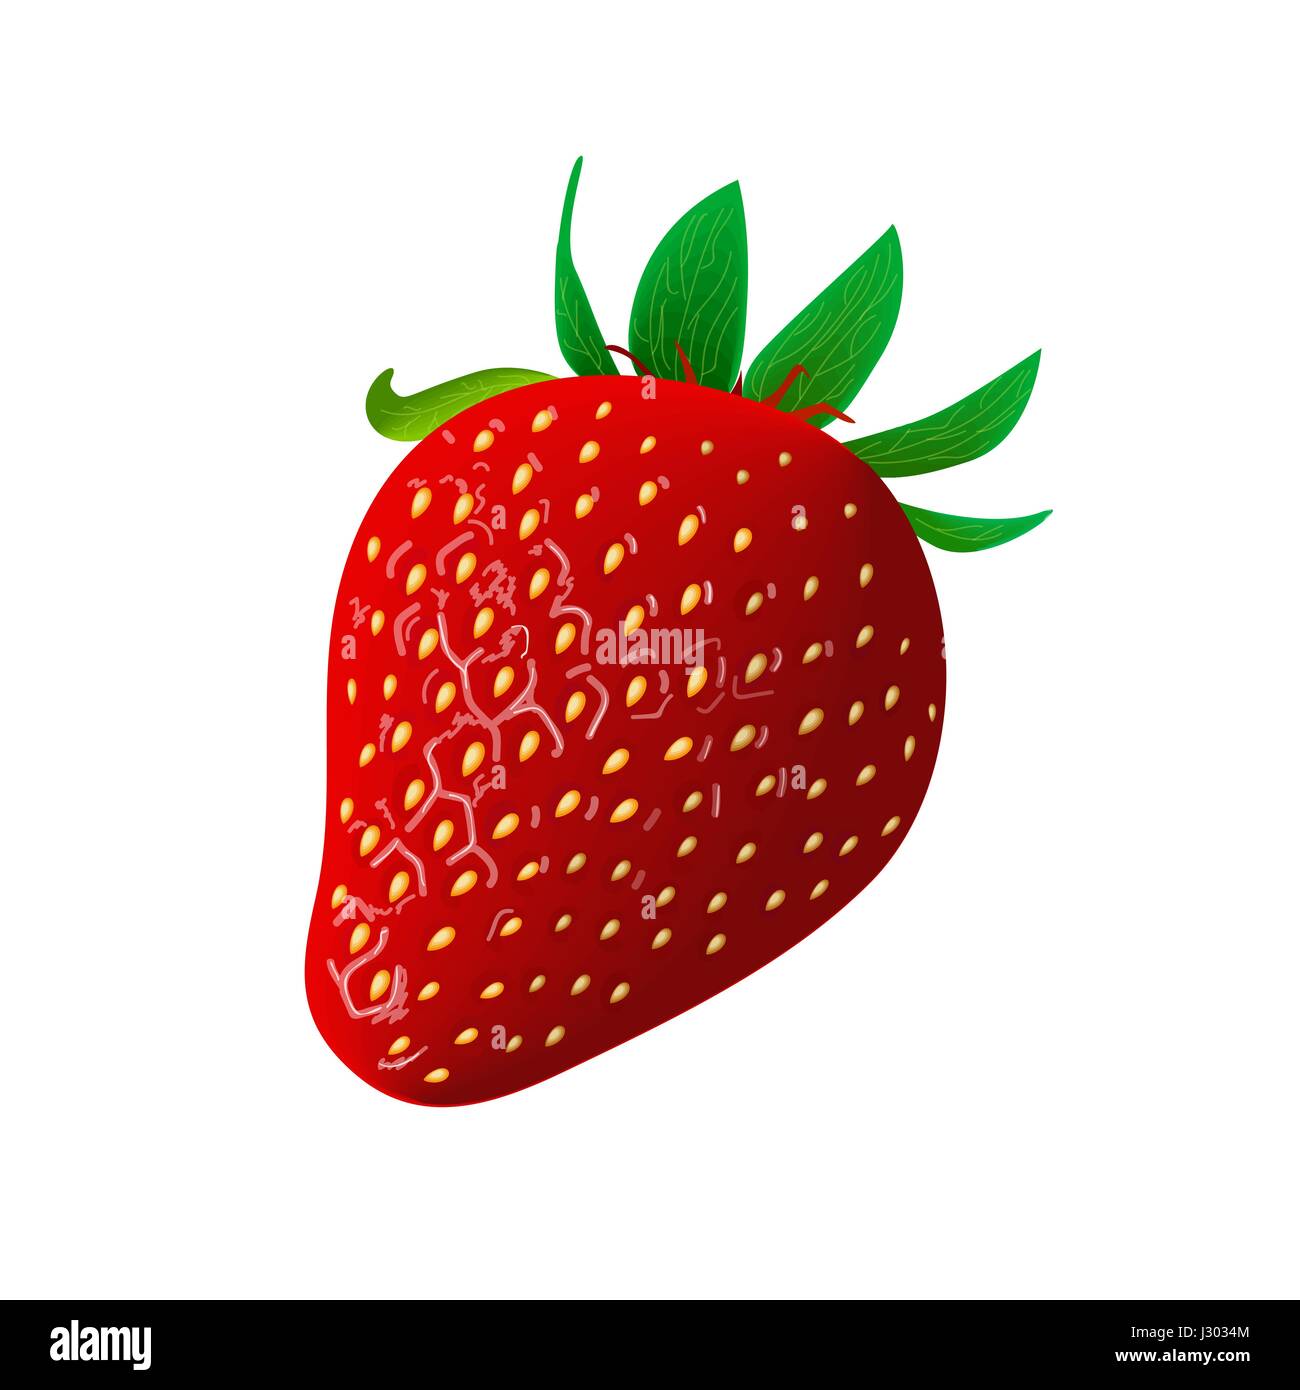 Strawberry Stock Vector Images - Alamy